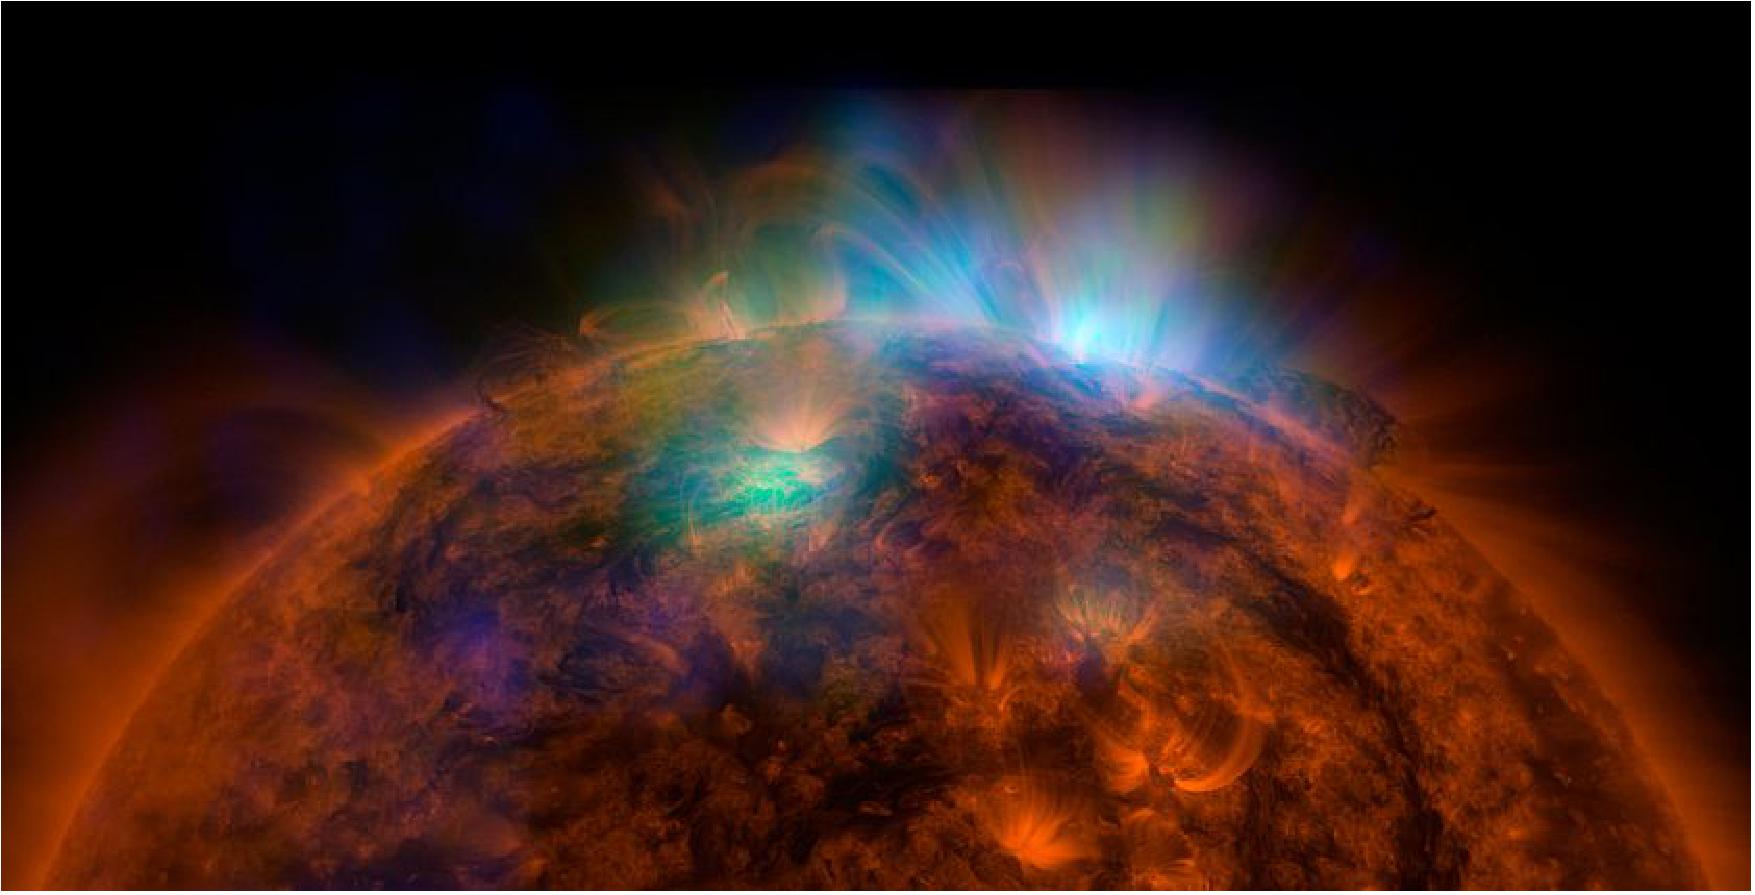 Figure 39: X-rays stream off the sun in this image showing observations from by NASA's Nuclear Spectroscopic Telescope Array, or NuSTAR, overlaid on a picture taken by NASA's SDO (Solar Dynamics Observatory), image credit: NASA/JPL-Caltech/GSFC